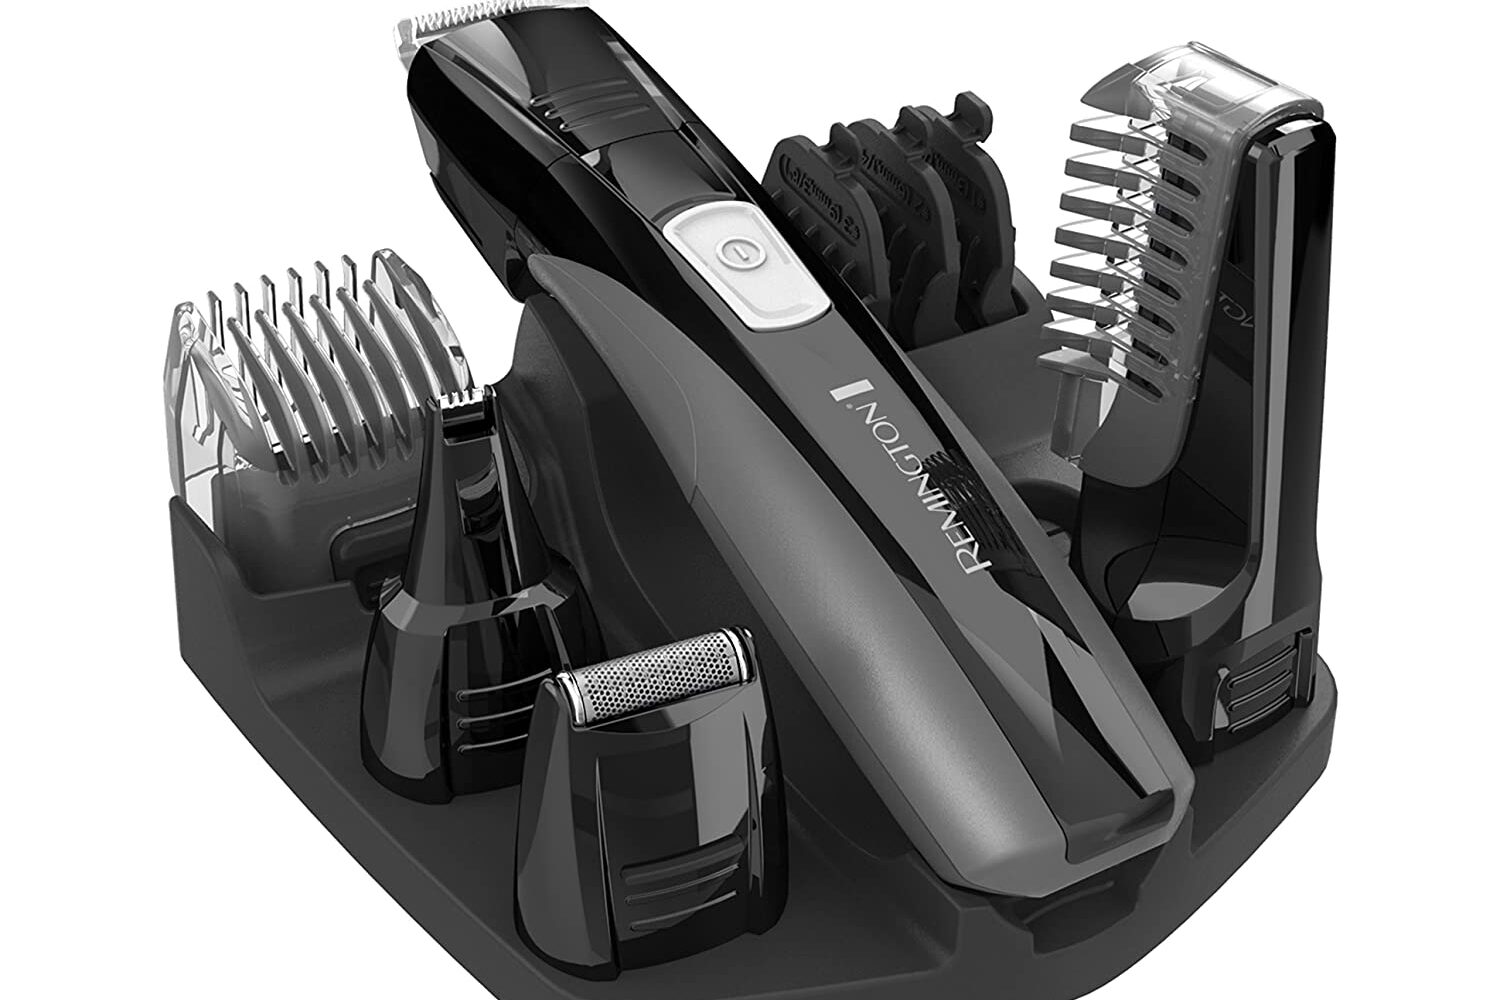 10 different attachments for a manscaping kit. | The Dating Divas